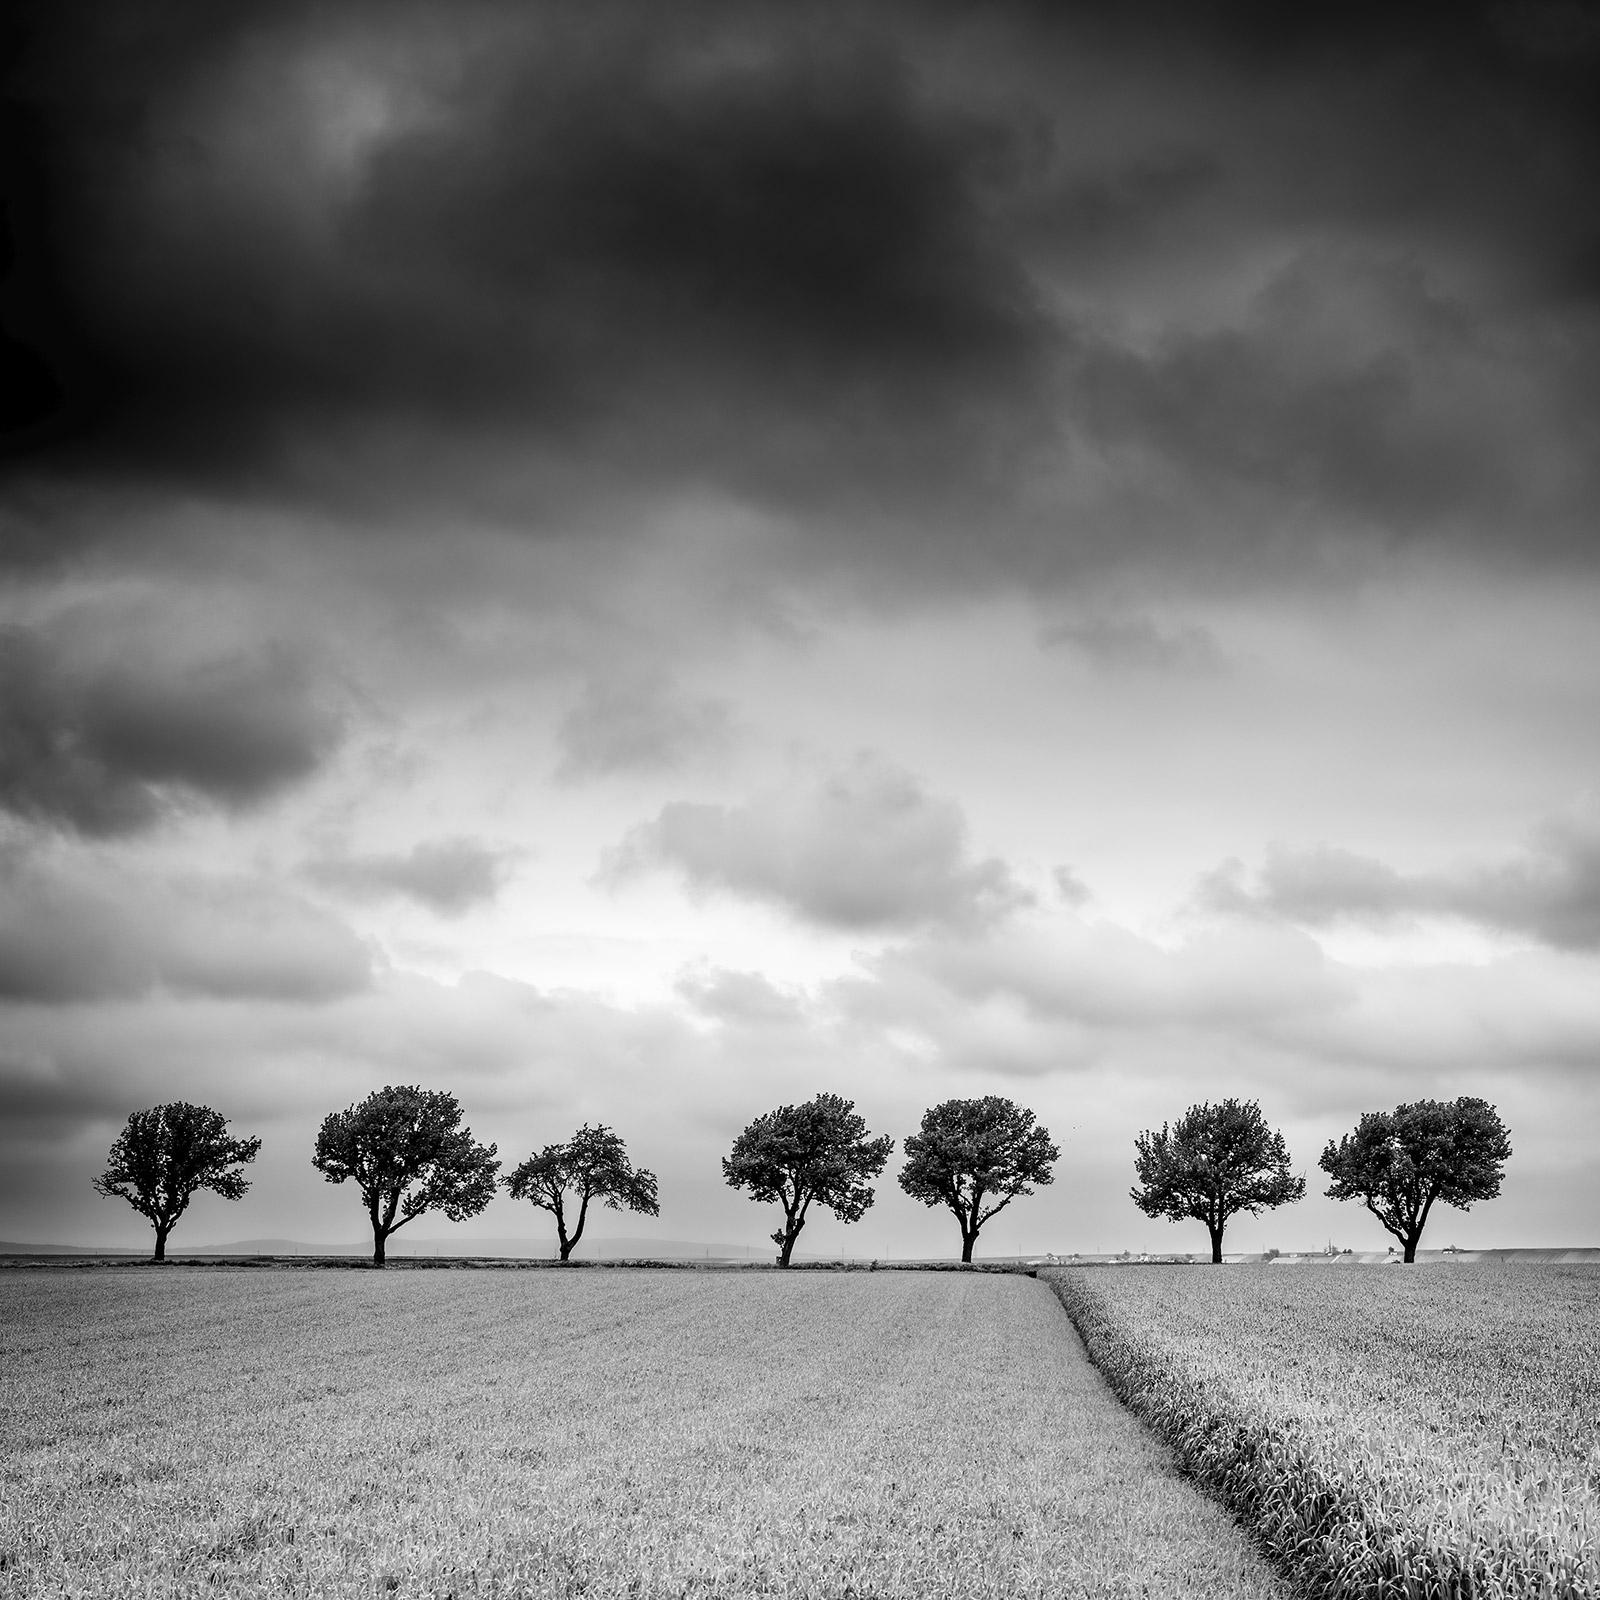 Landscape Print Gerald Berghammer - The Trees on the edge of Field, cloudy, storm, black white art landscape photography